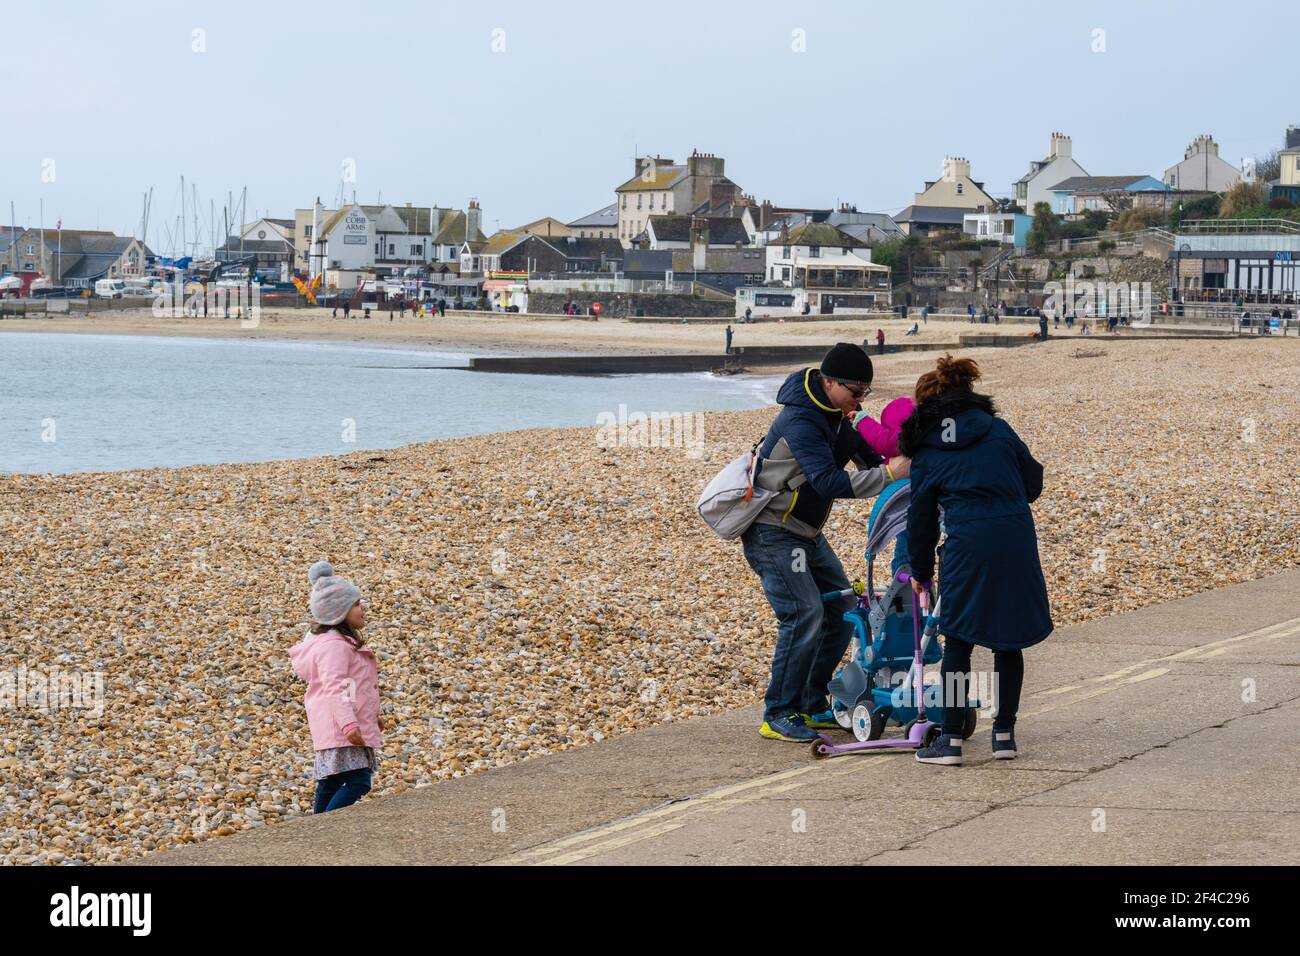 Lyme Regis, Dorset, UK. 20th Mar, 2021. UK Weather: After a dull start, sun breaks through the cloud at the seaside resort of Lyme Regis bringing a fine start to meteorological spring. People were out and about along the seafront enjoying the lovely mild weather. Credit: Celia McMahon/Alamy Live News Stock Photo